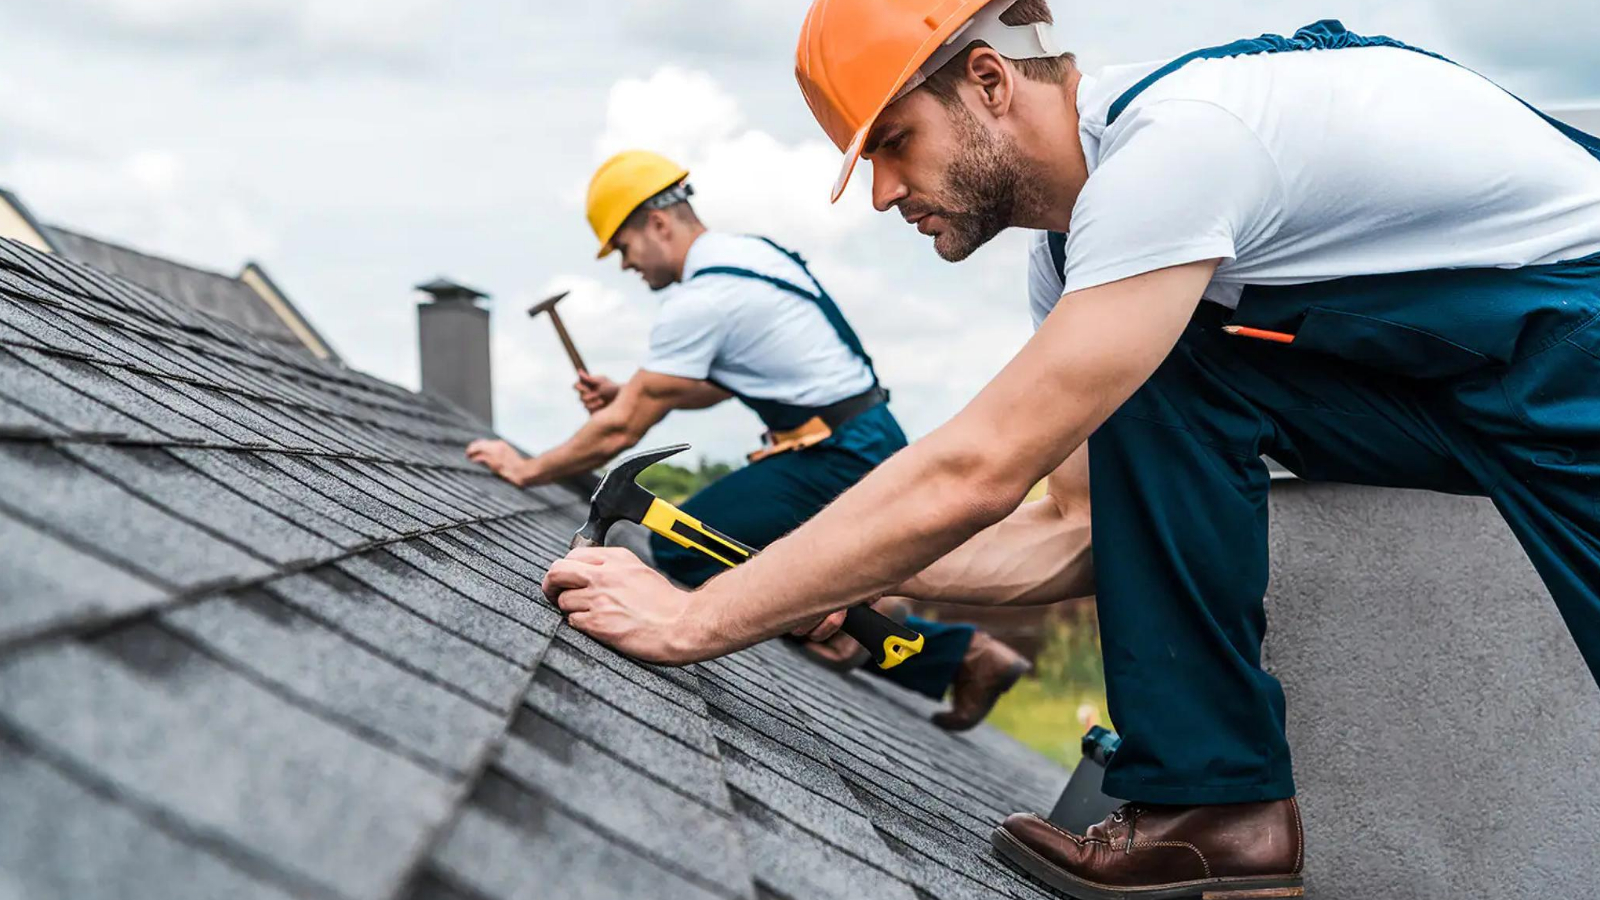 handymen repairing roof with coworker after receiving job from roofing SEO services